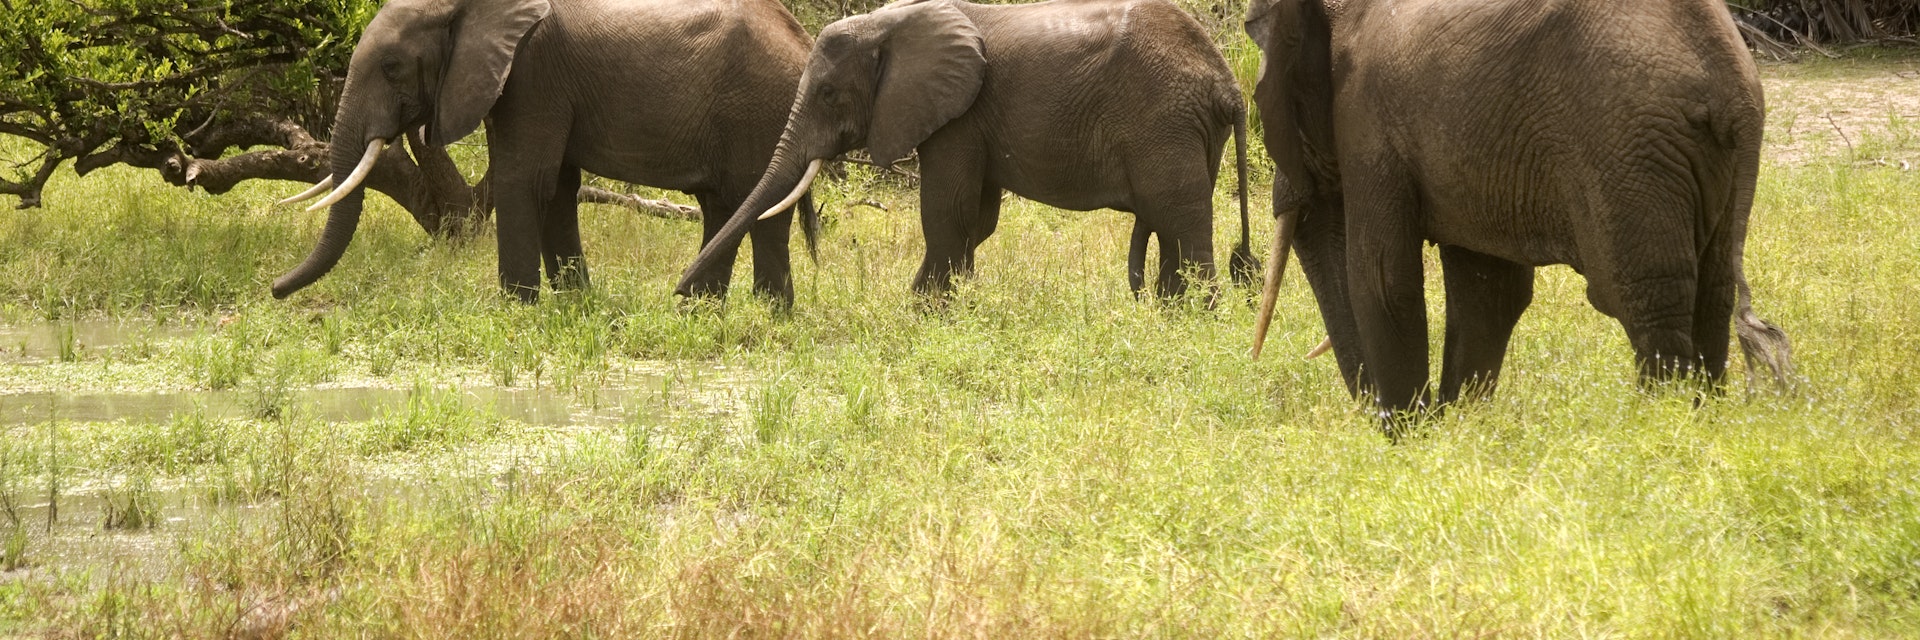 Young elephant bulls in Selous Game Reserve, Tanzania.